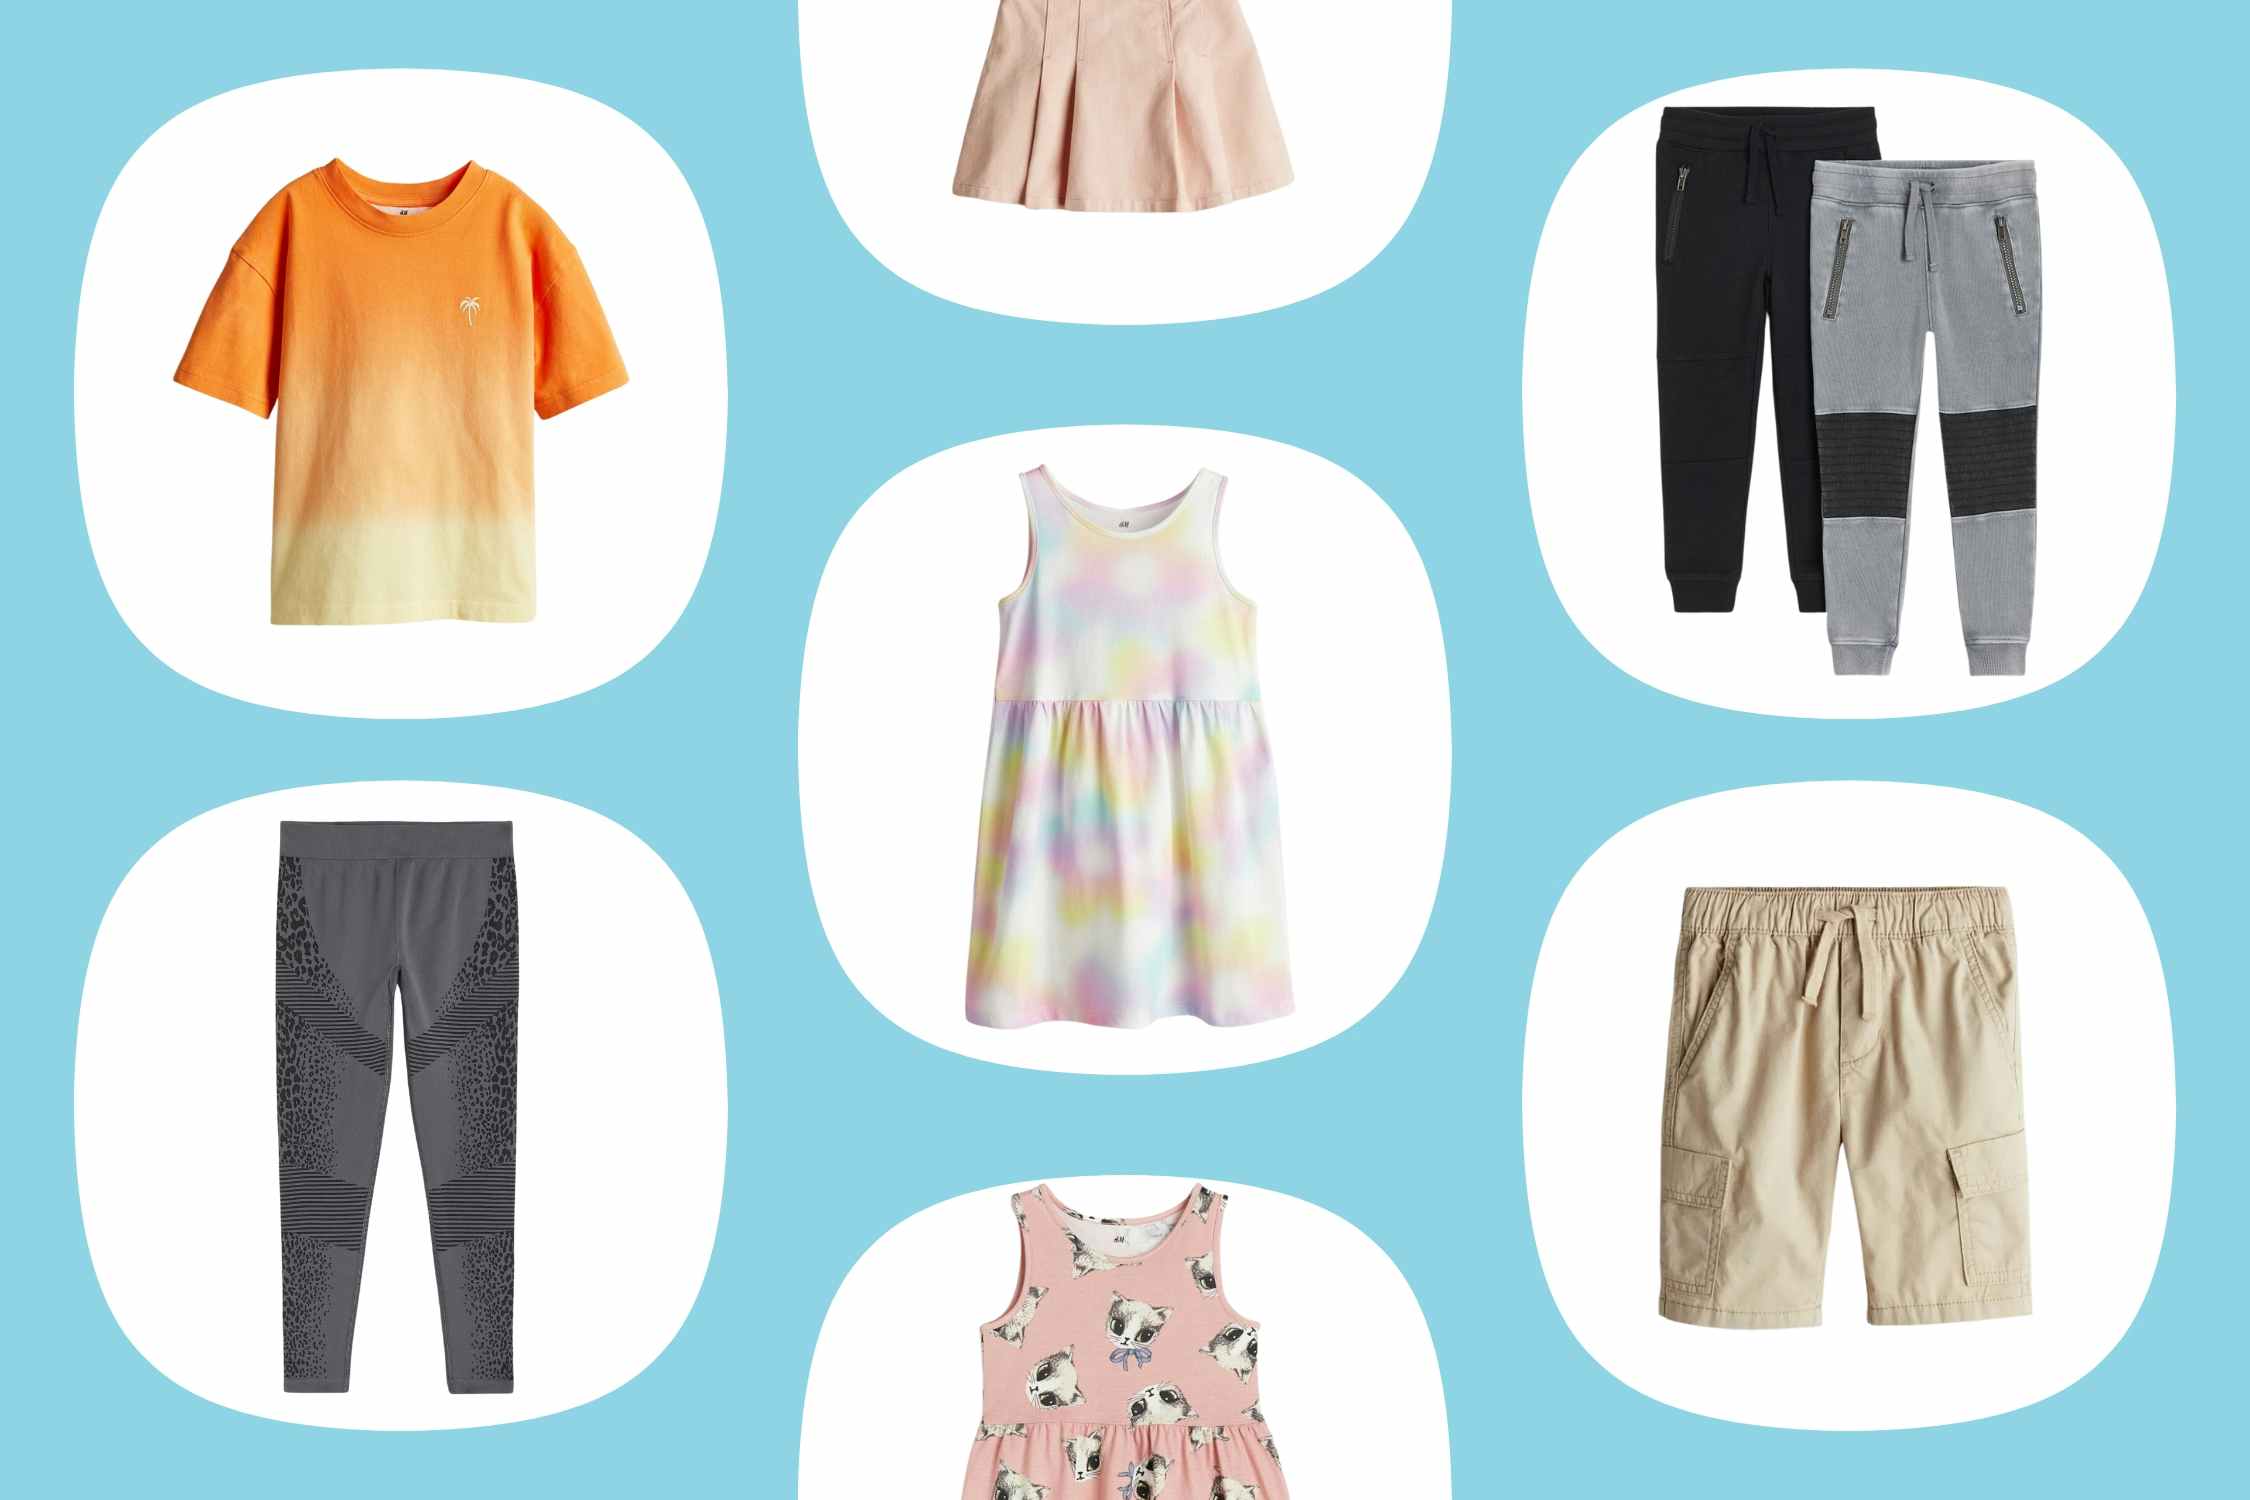 H&M Kids' Clearance Event: $1 dresses, $4 Shirts, $13 Leggings, and More